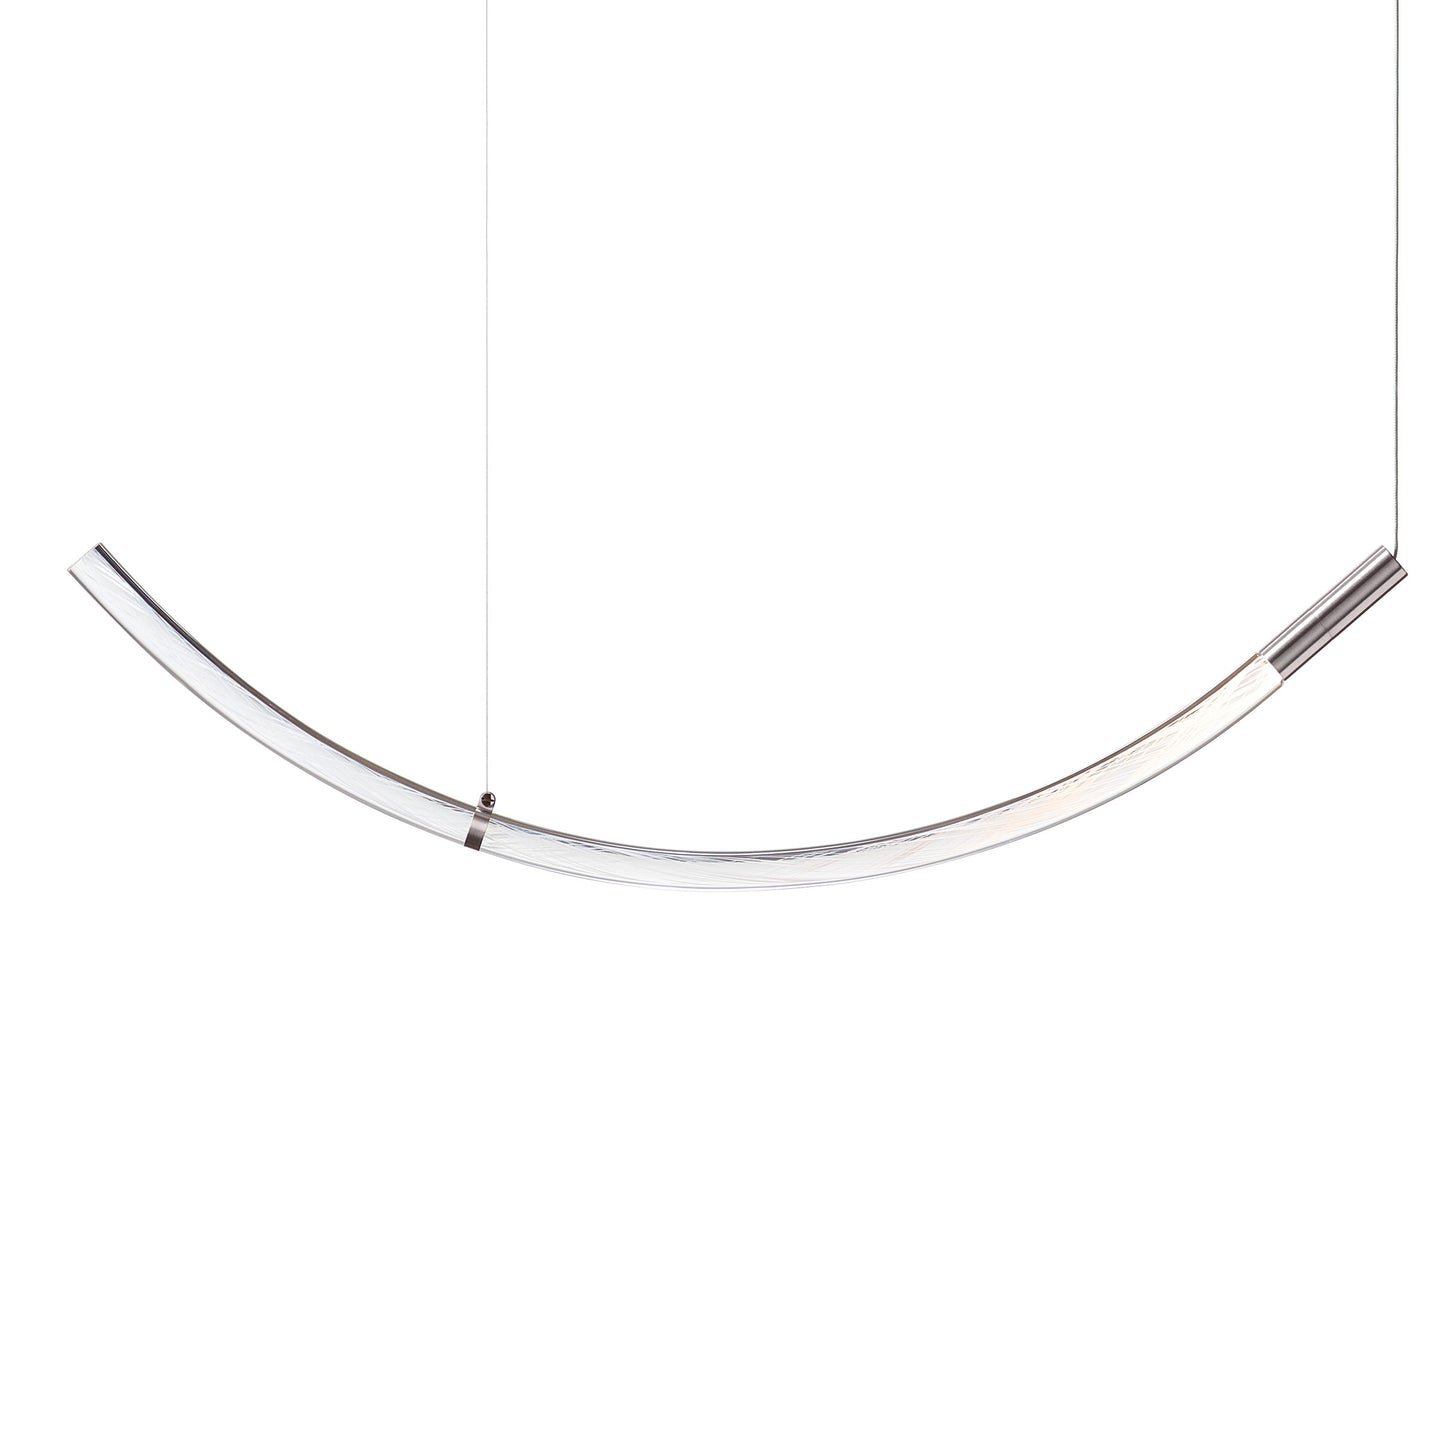 BOMMA - FLARE PENDANT - from $3,812.00